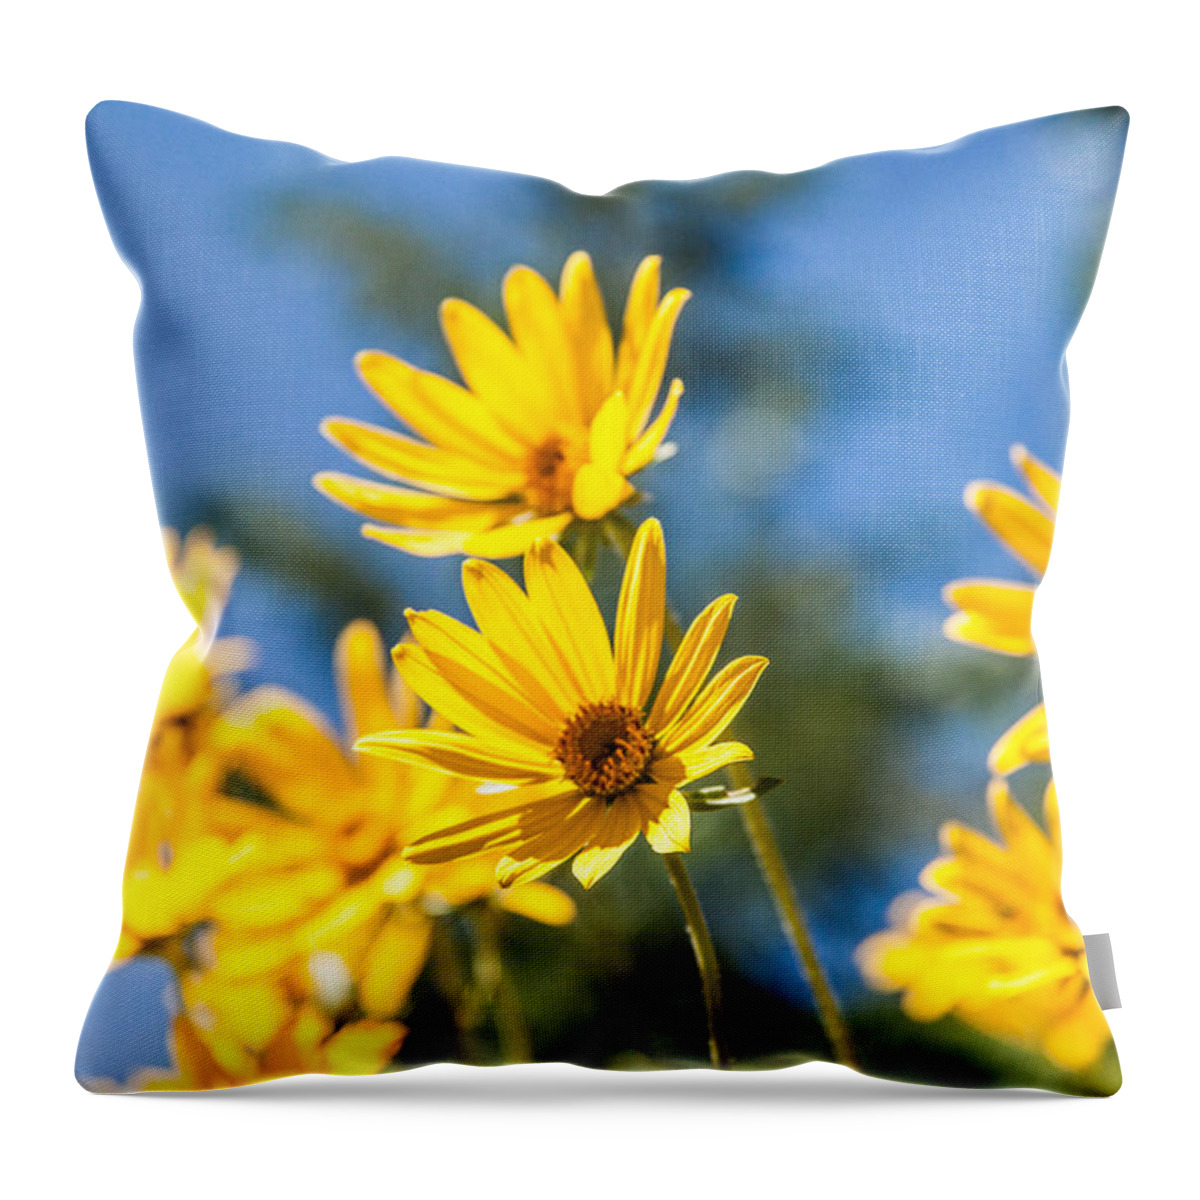 Flowers Throw Pillow featuring the photograph Sunshine by Chad Dutson